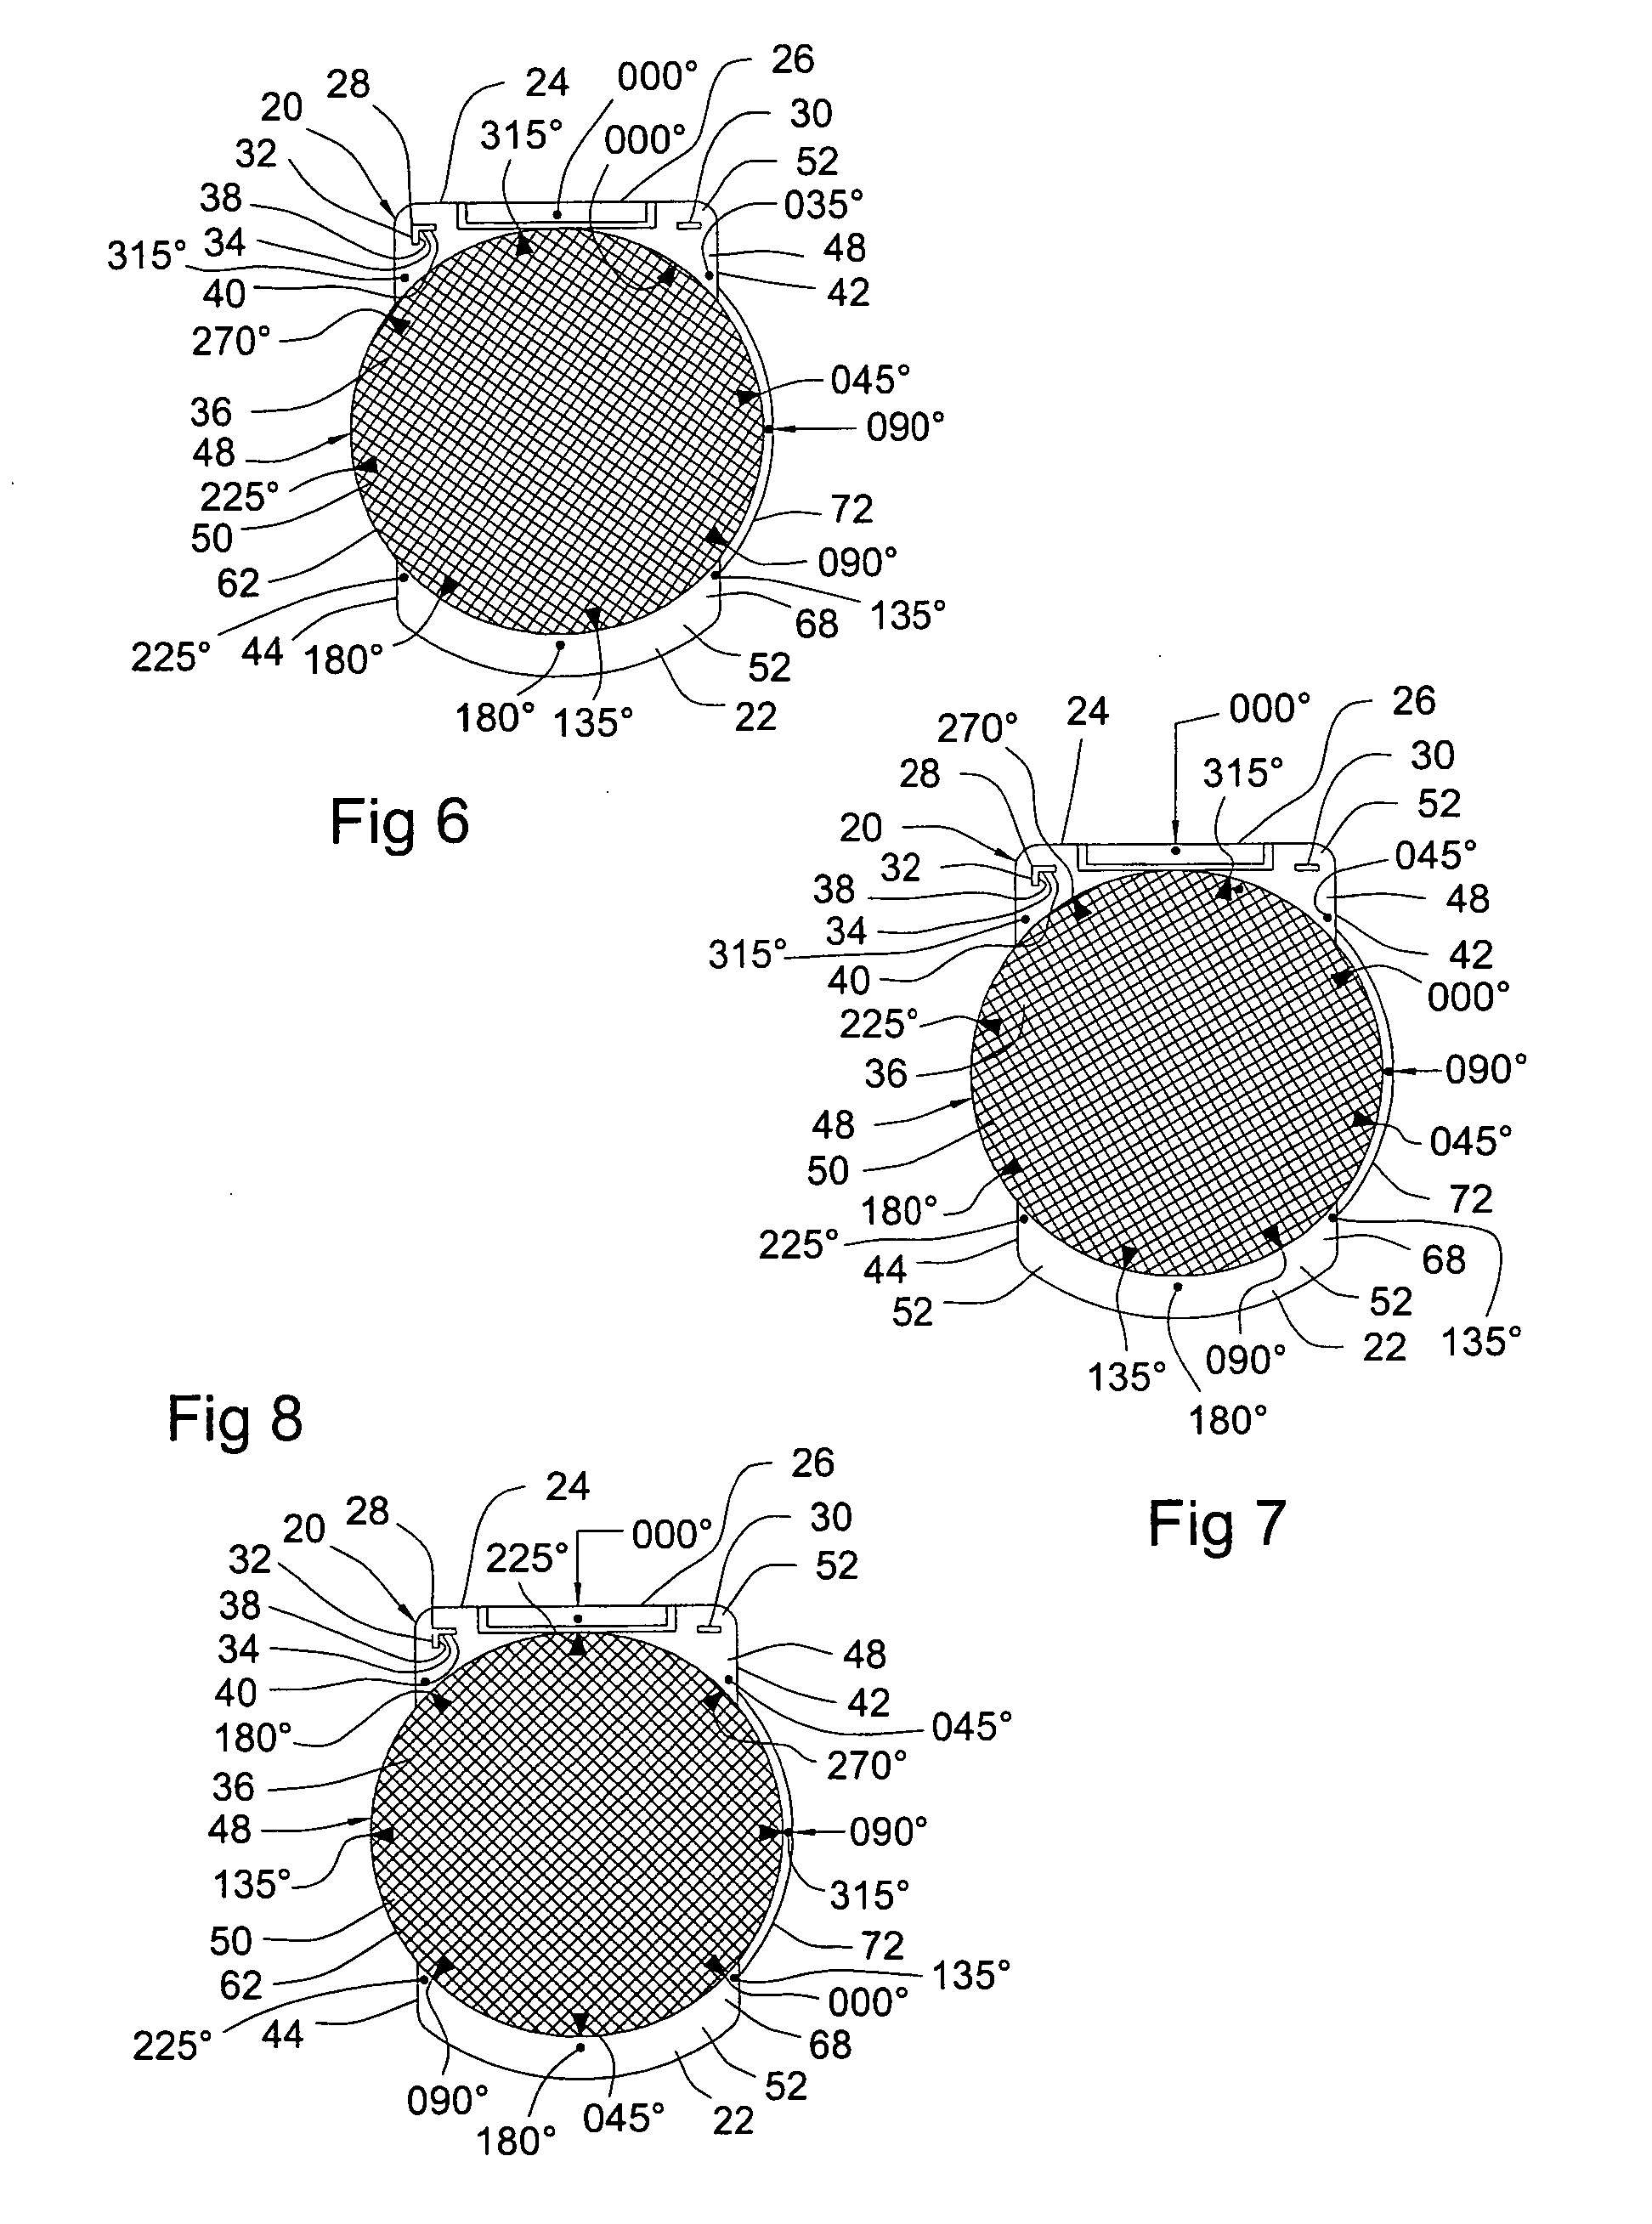 Device for drawing lines on a sized sheet of paper and maintaining registration of the paper when it has been removed and is being replaced on the device